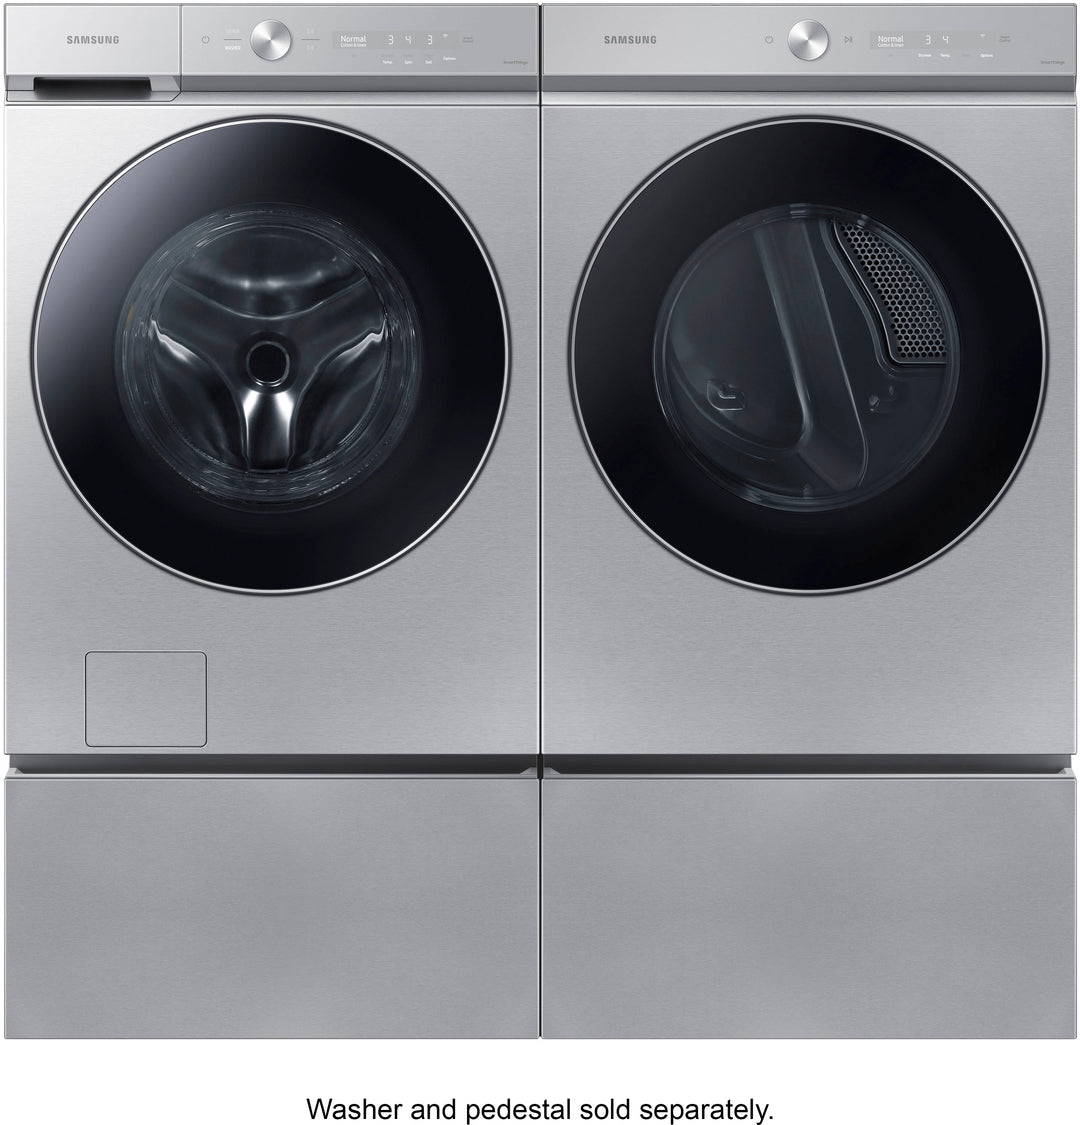 Samsung - Bespoke 7.6 cu. ft. Ultra Capacity Electric Dryer with AI Optimal Dry and Super Speed Dry - Silver steel_10